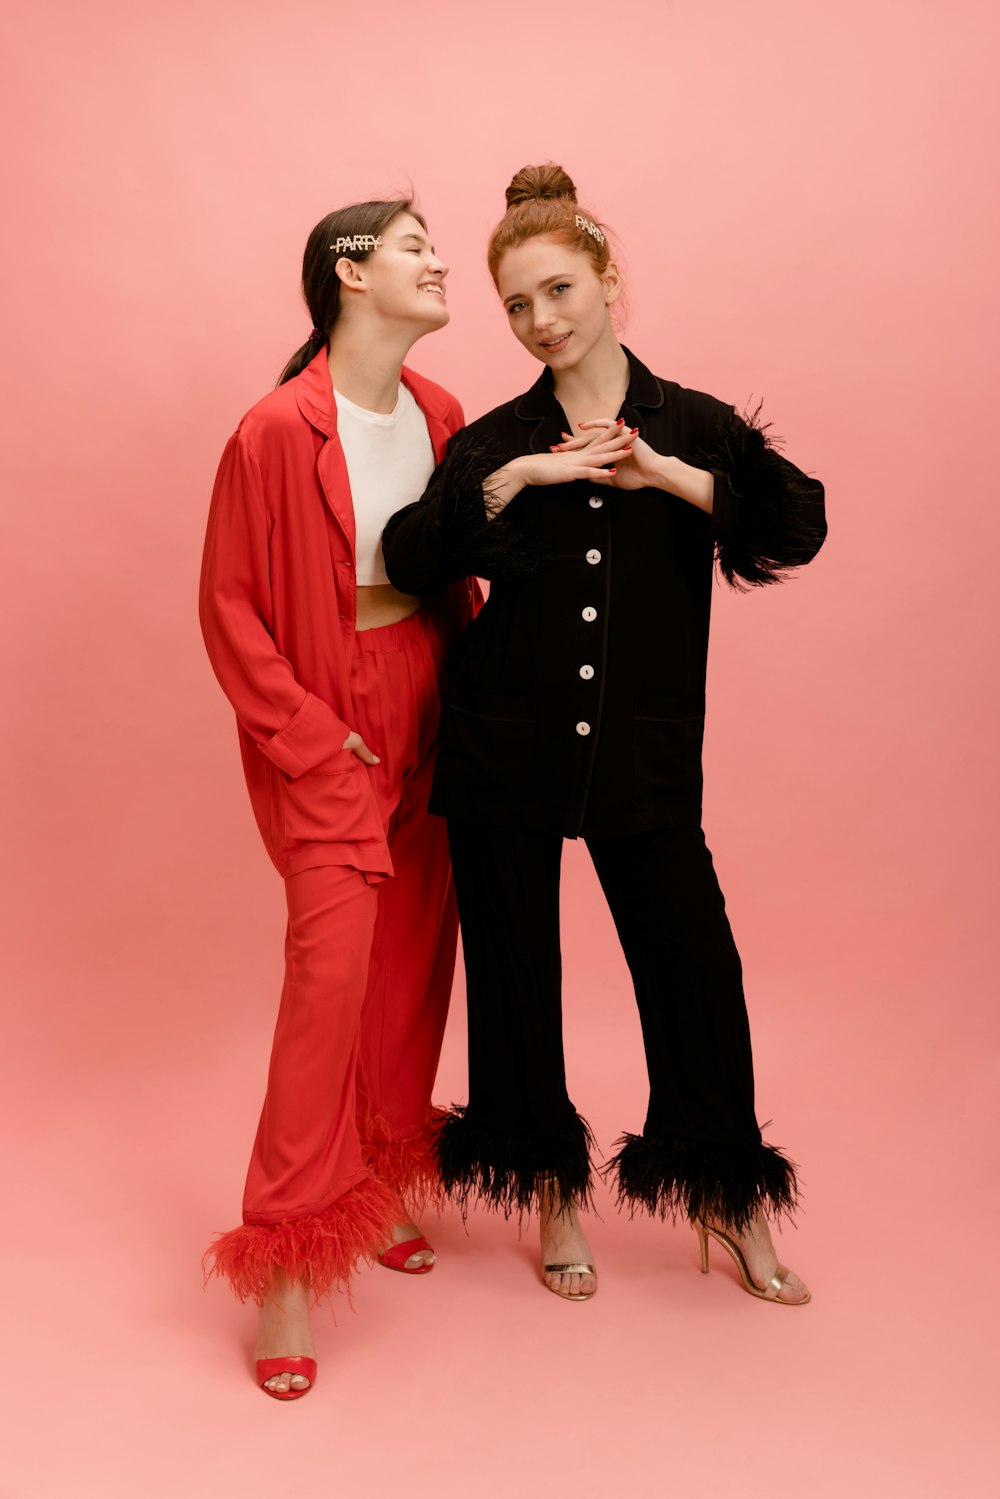 two women standing next to each other in front of a pink background